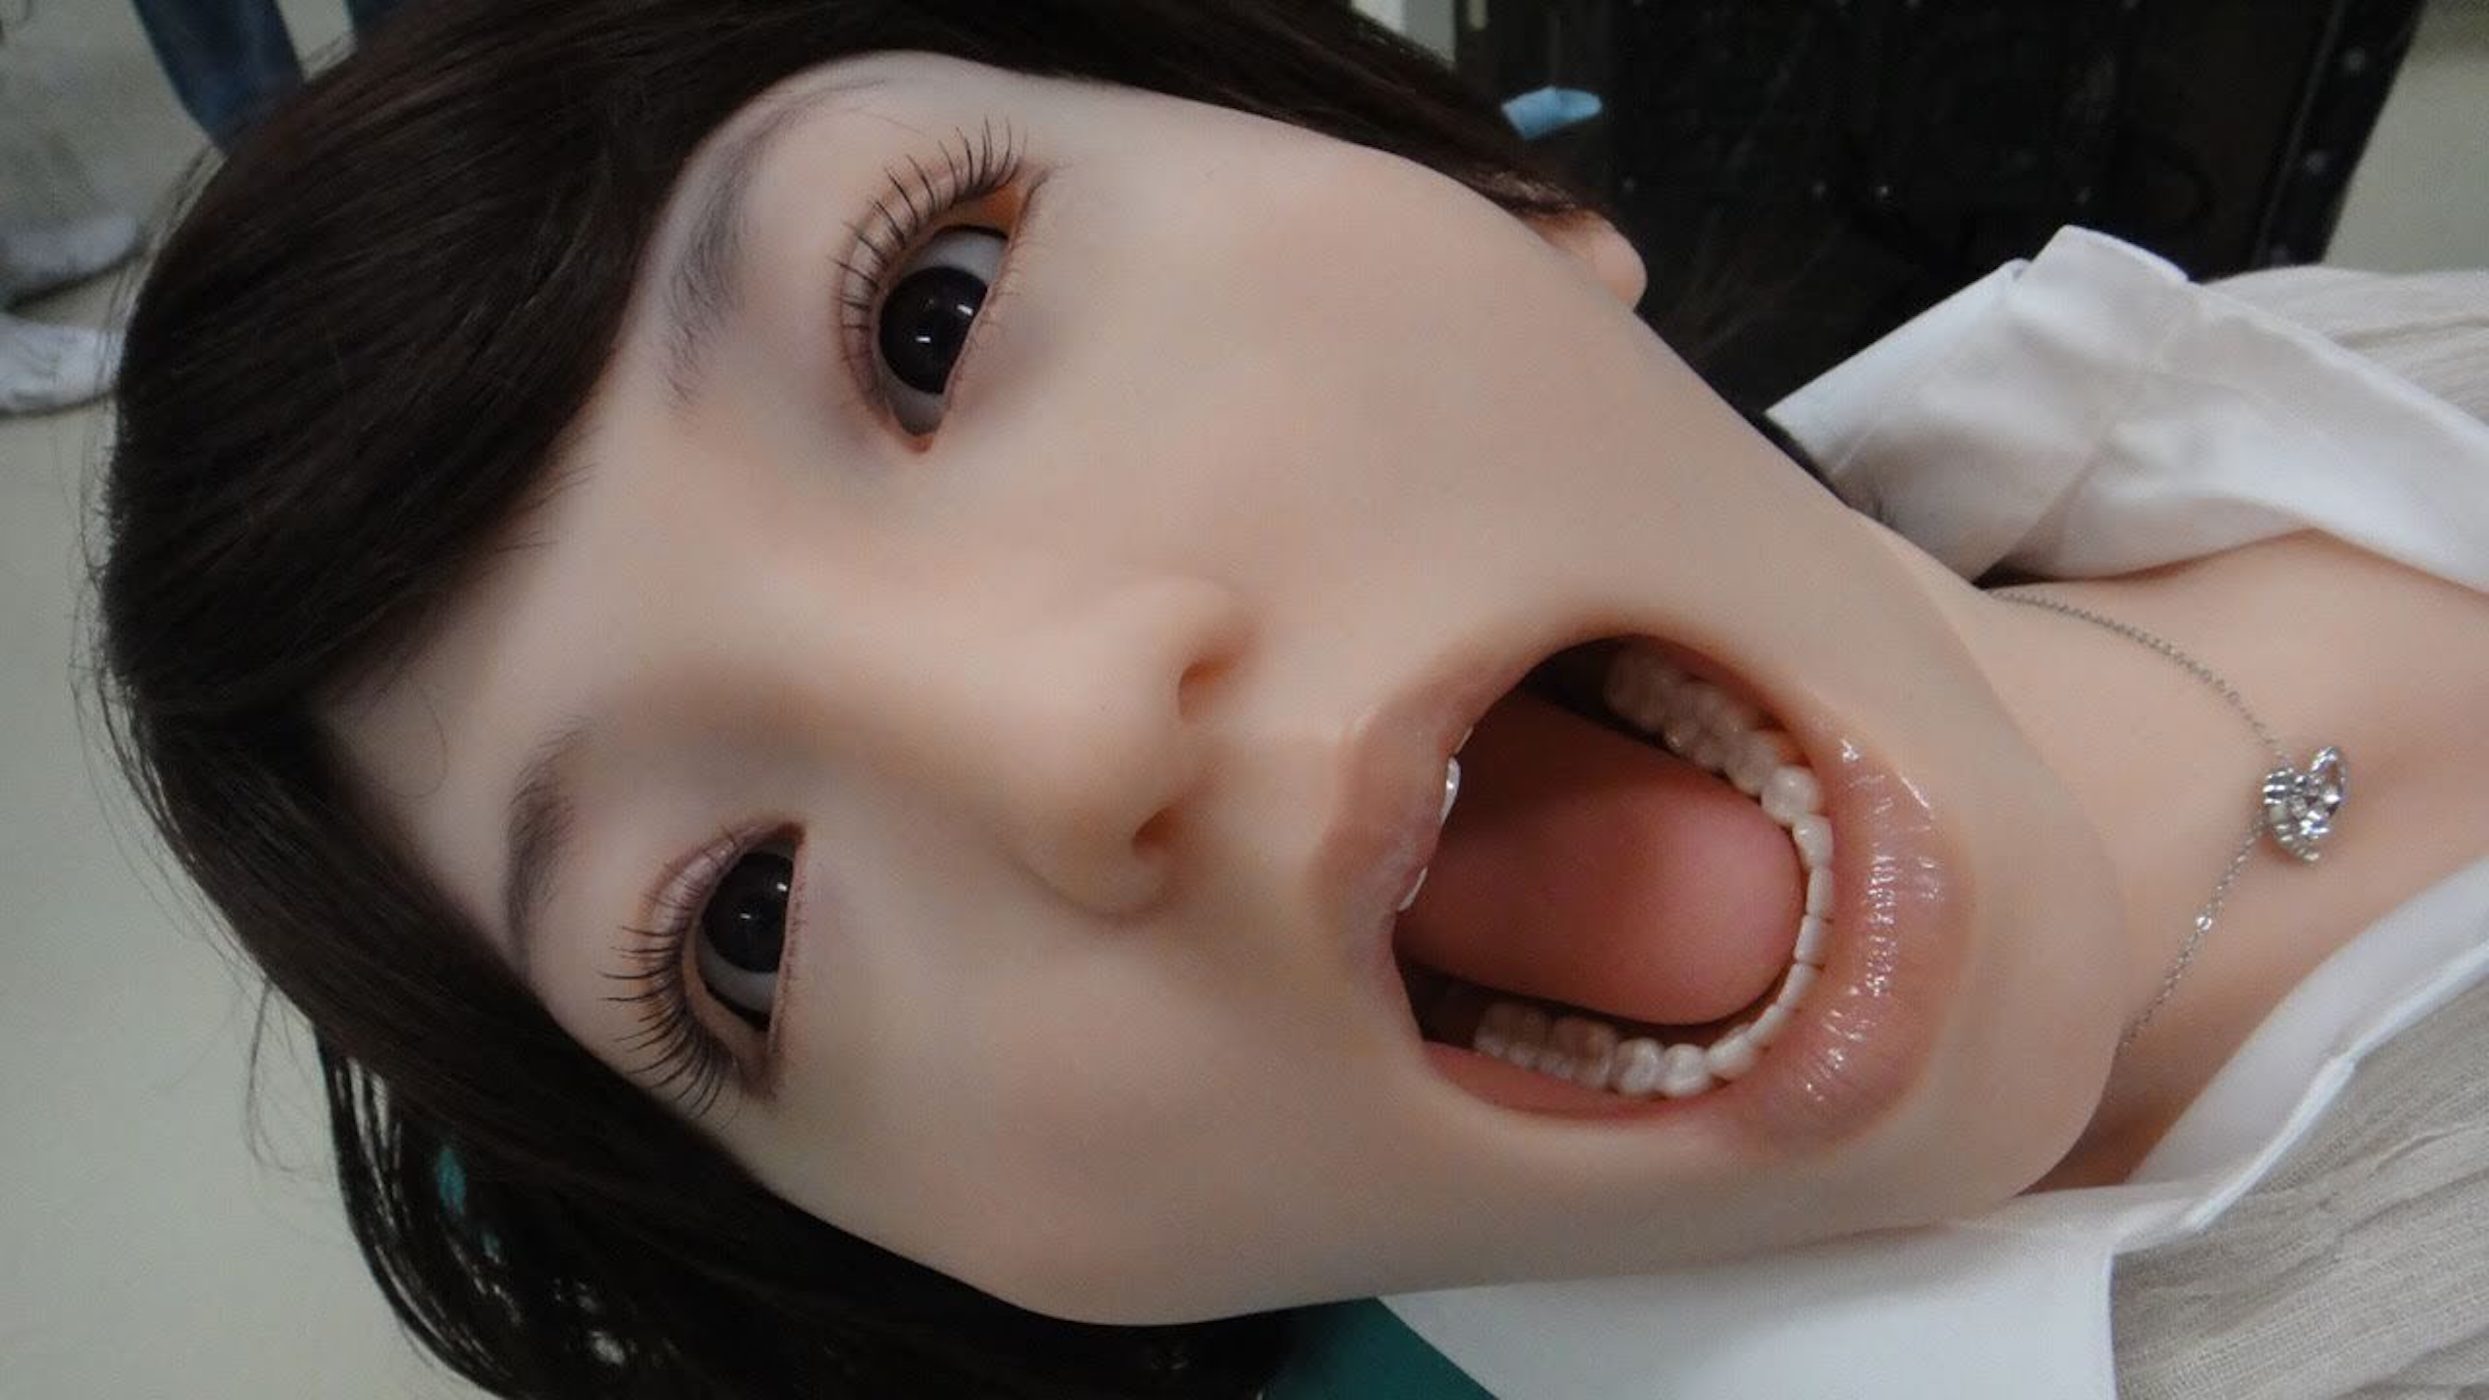 Did That Horrifying Malfunctioning School Robot Come From?